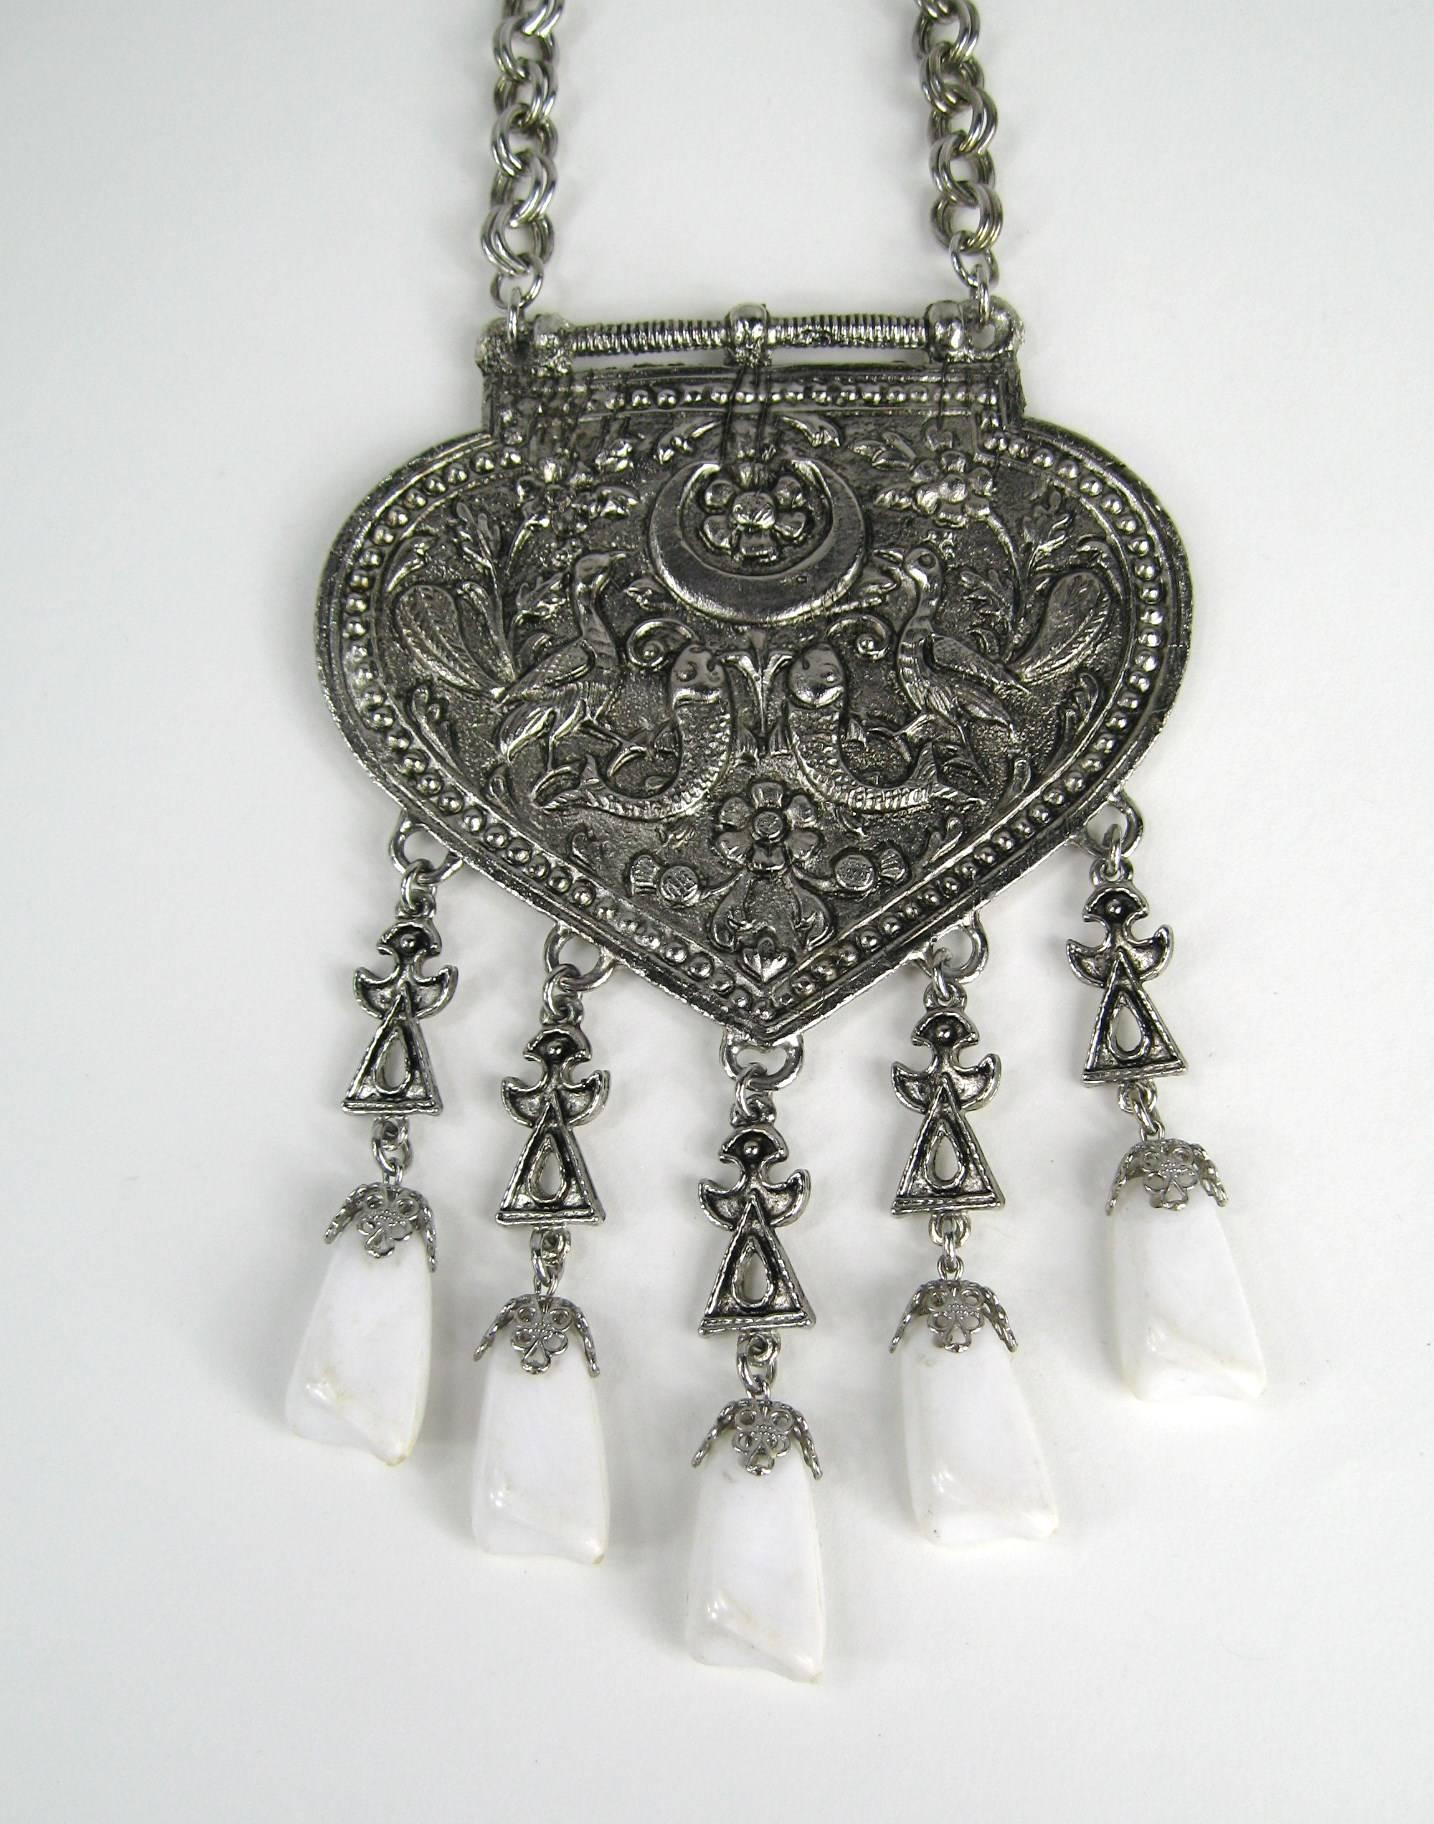 This is a huge necklace! 1960s  silver tone with fish and birds
Measuring 4